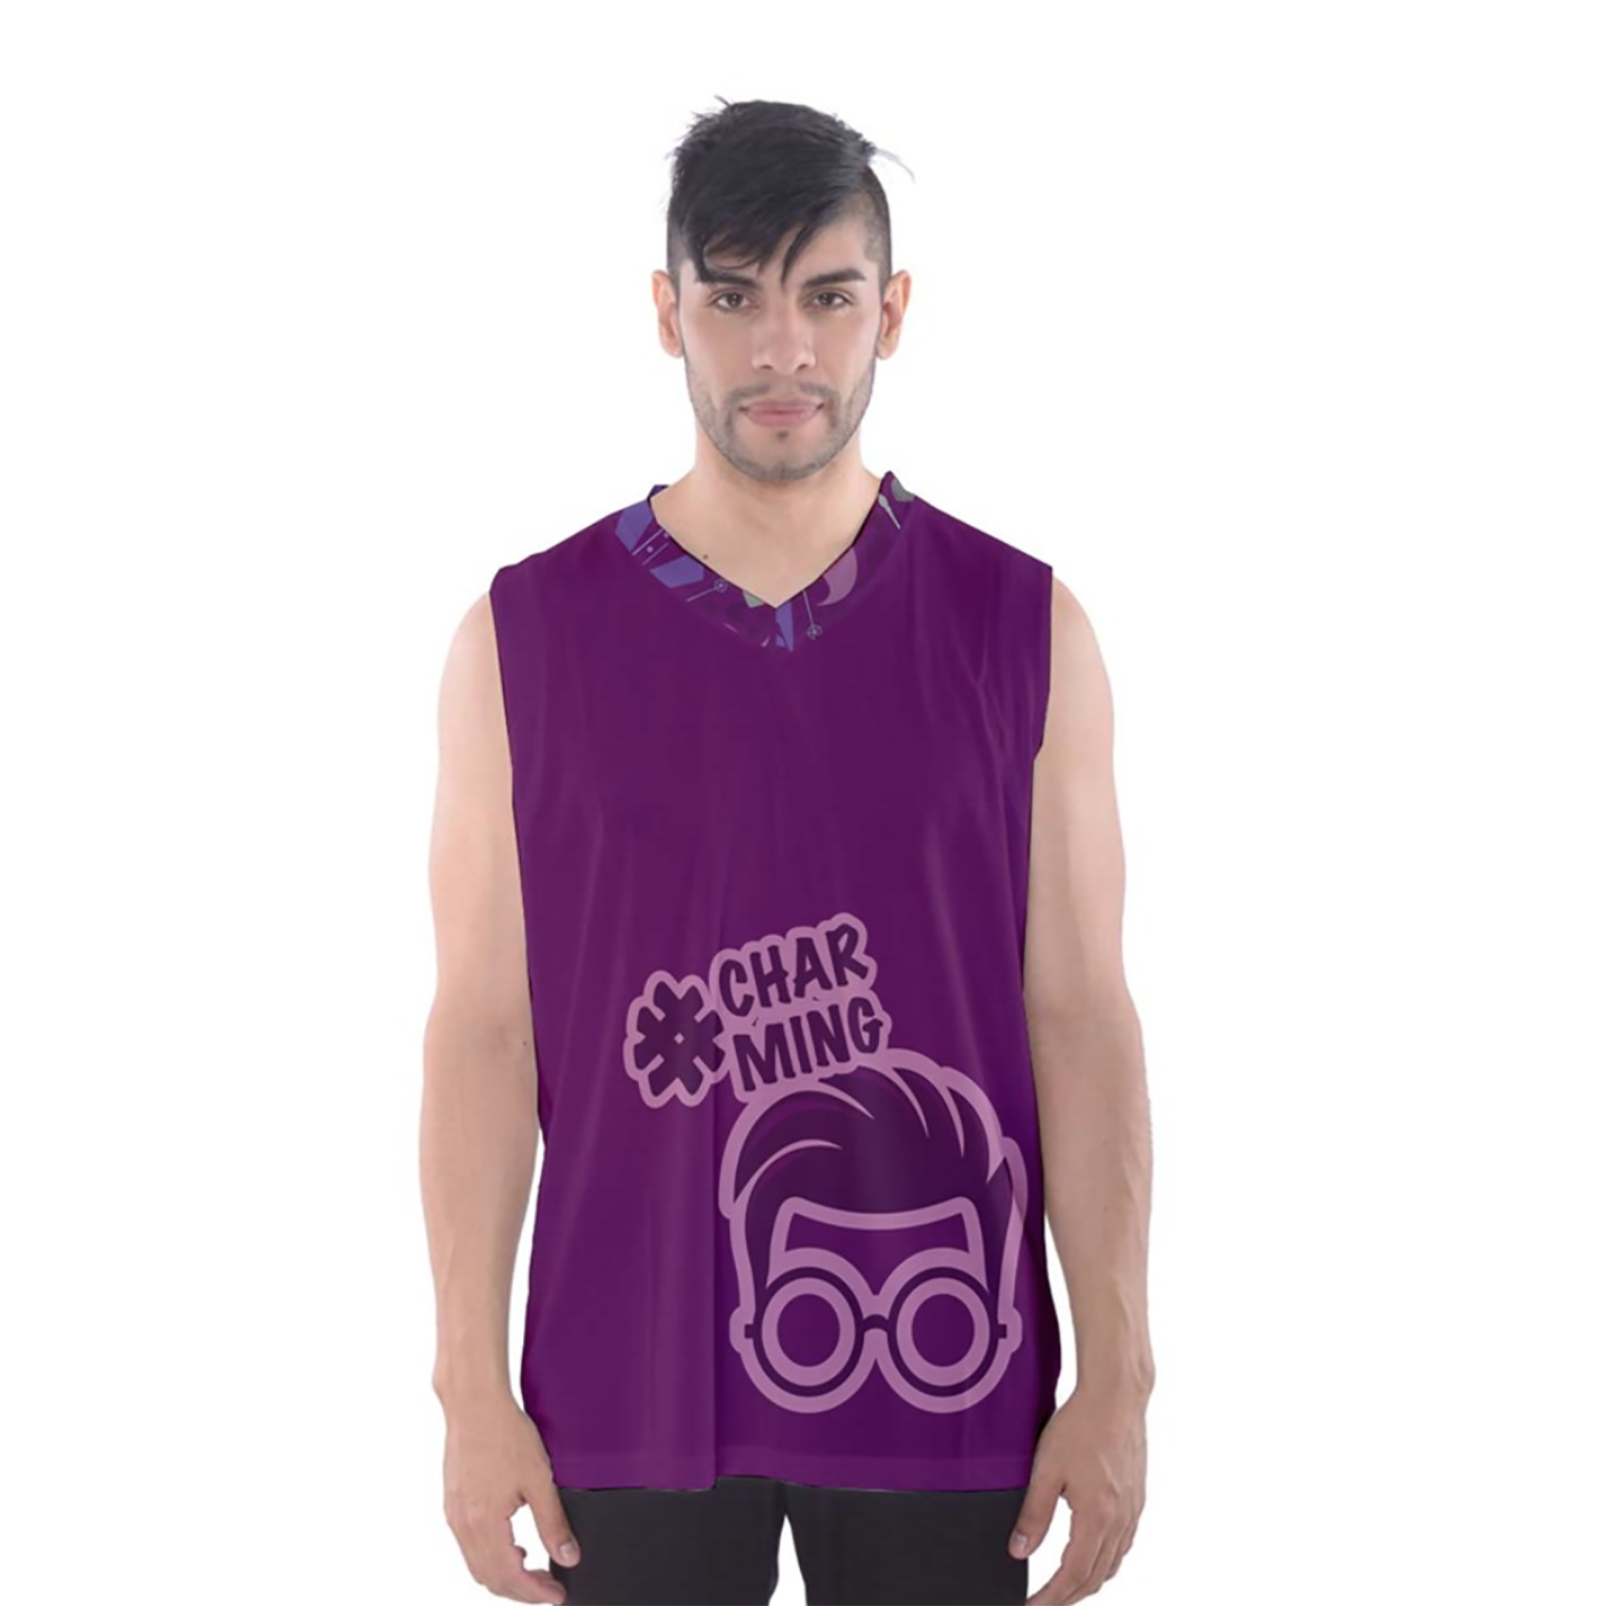 Charming Men's Tank Top (Solid Color Body)